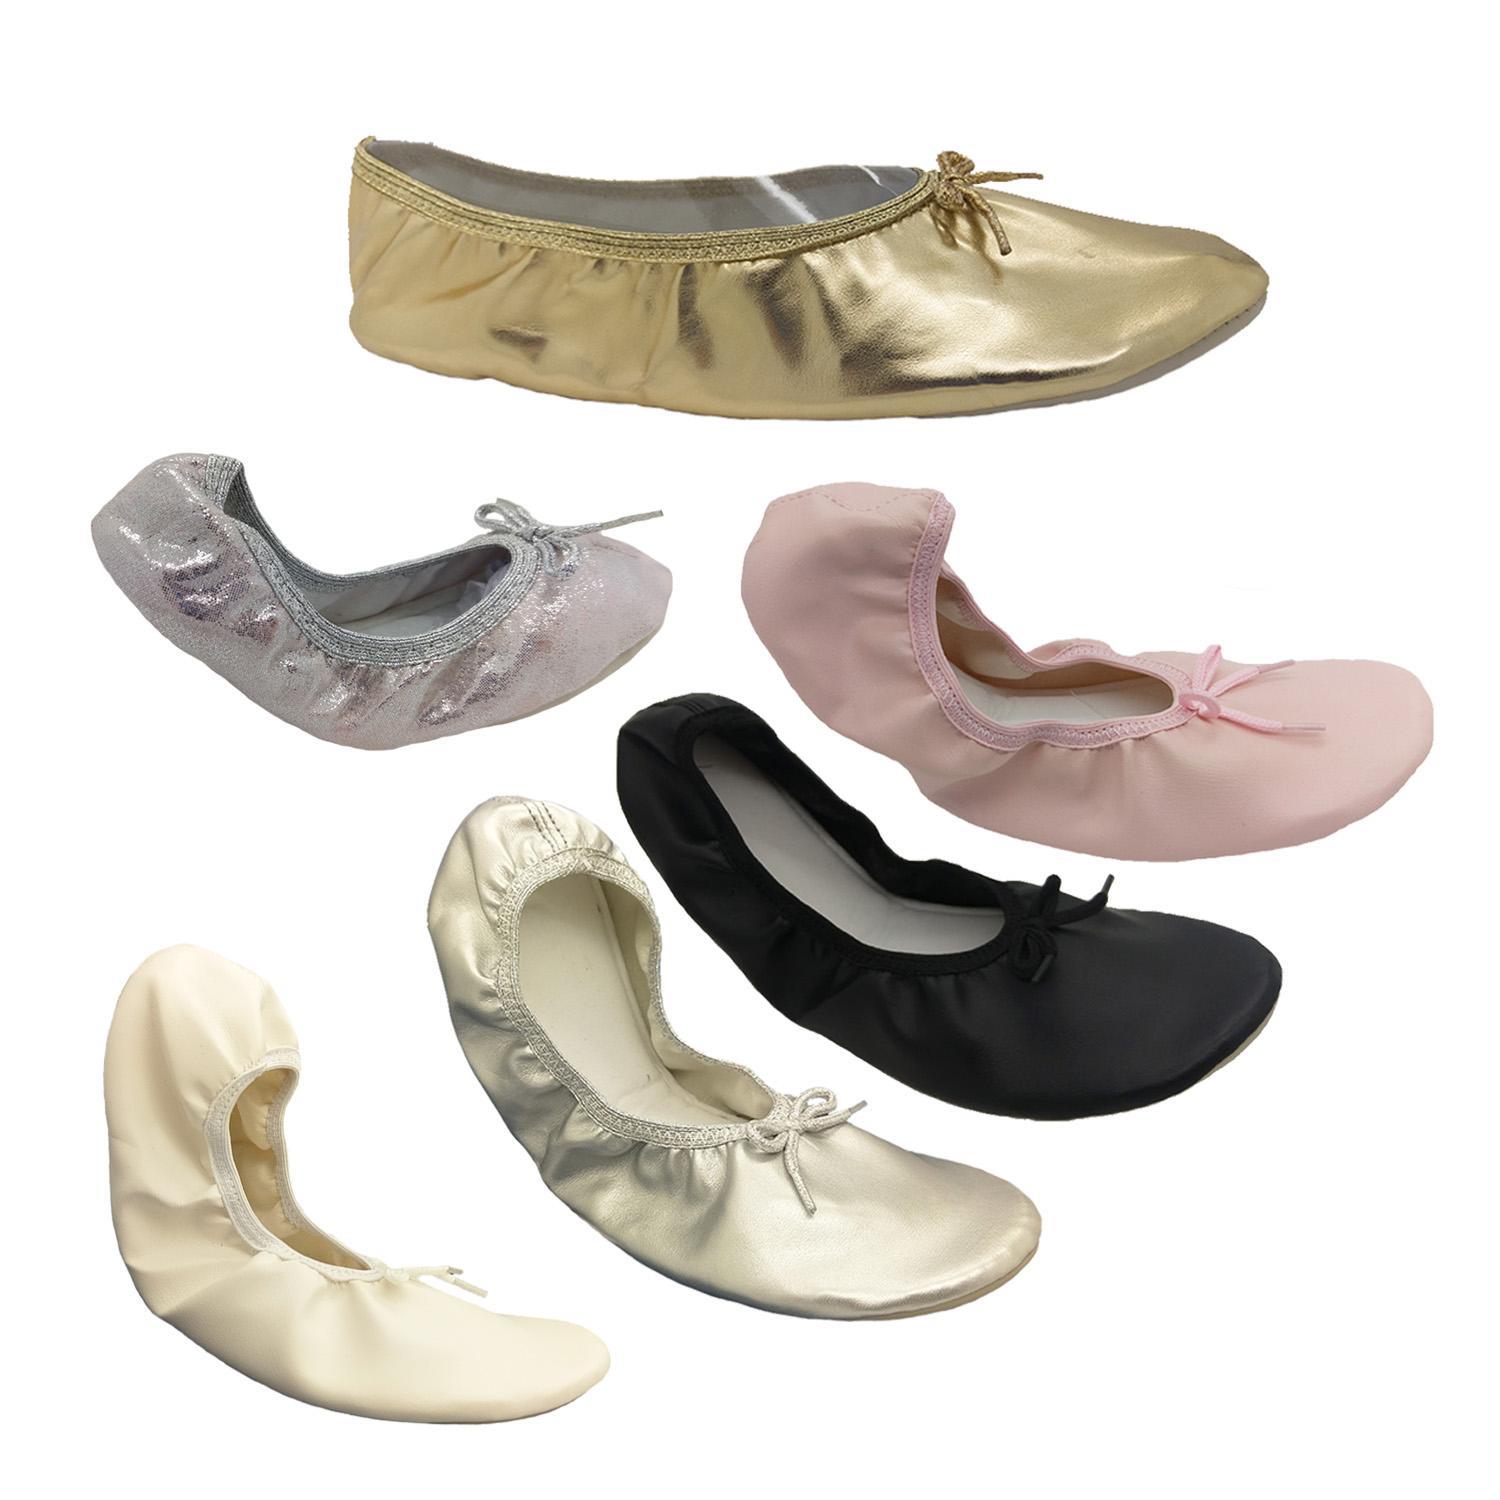 Girls Genuine Jiffies Classic Ballet Flats Elastic Edge Soft Insole Size 5 - 3-White-11-12